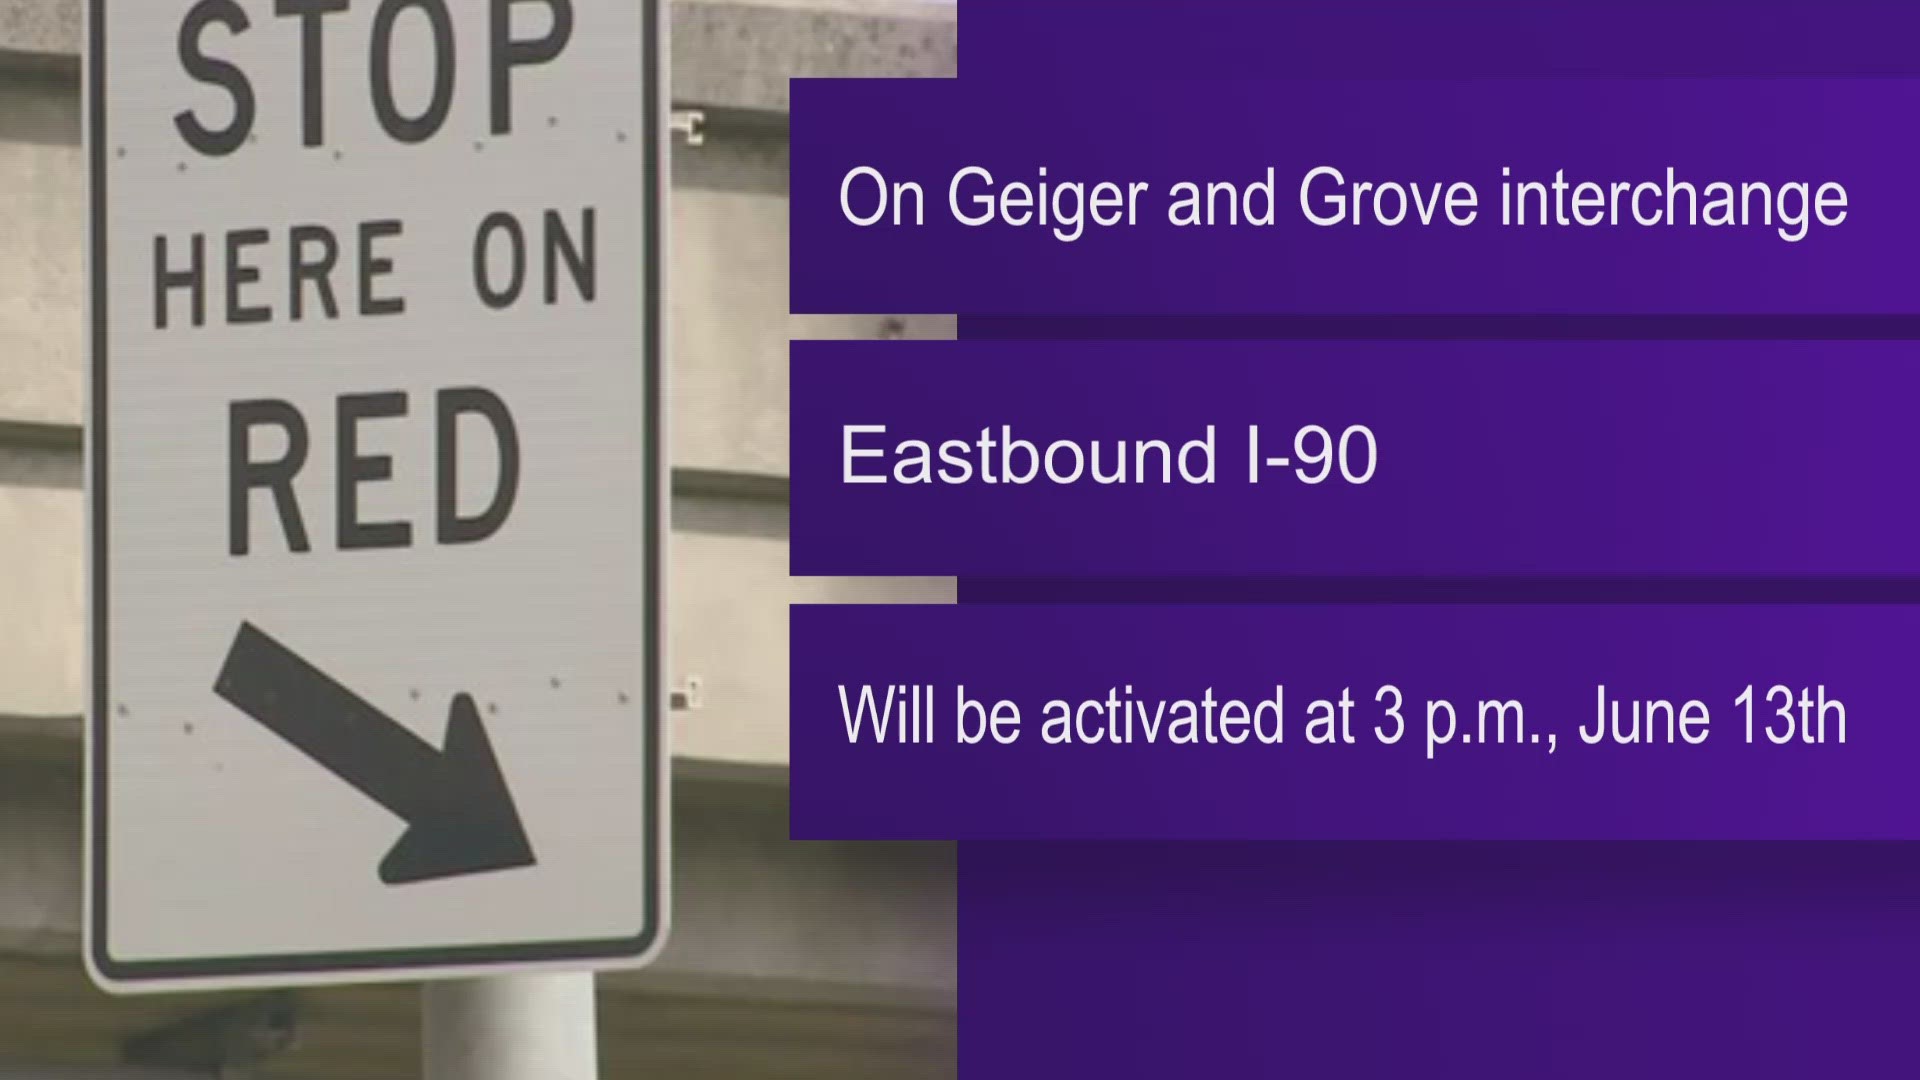 The ramp meters will be activated at 3 p.m. on Tuesday, June 13.